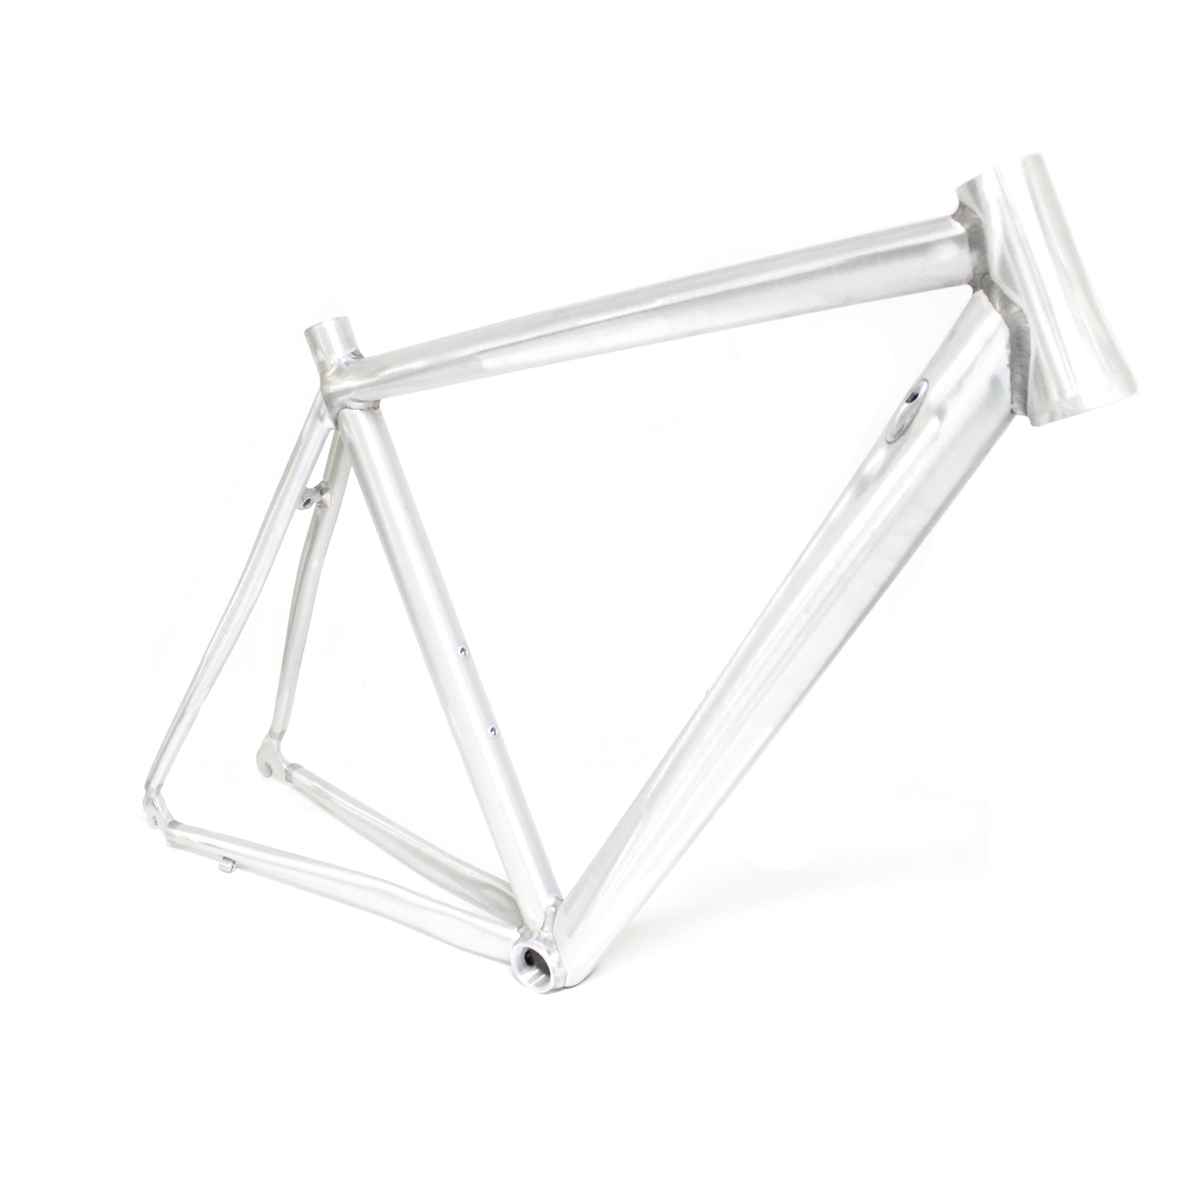 Road alloy tapered Caliper Frame size 53